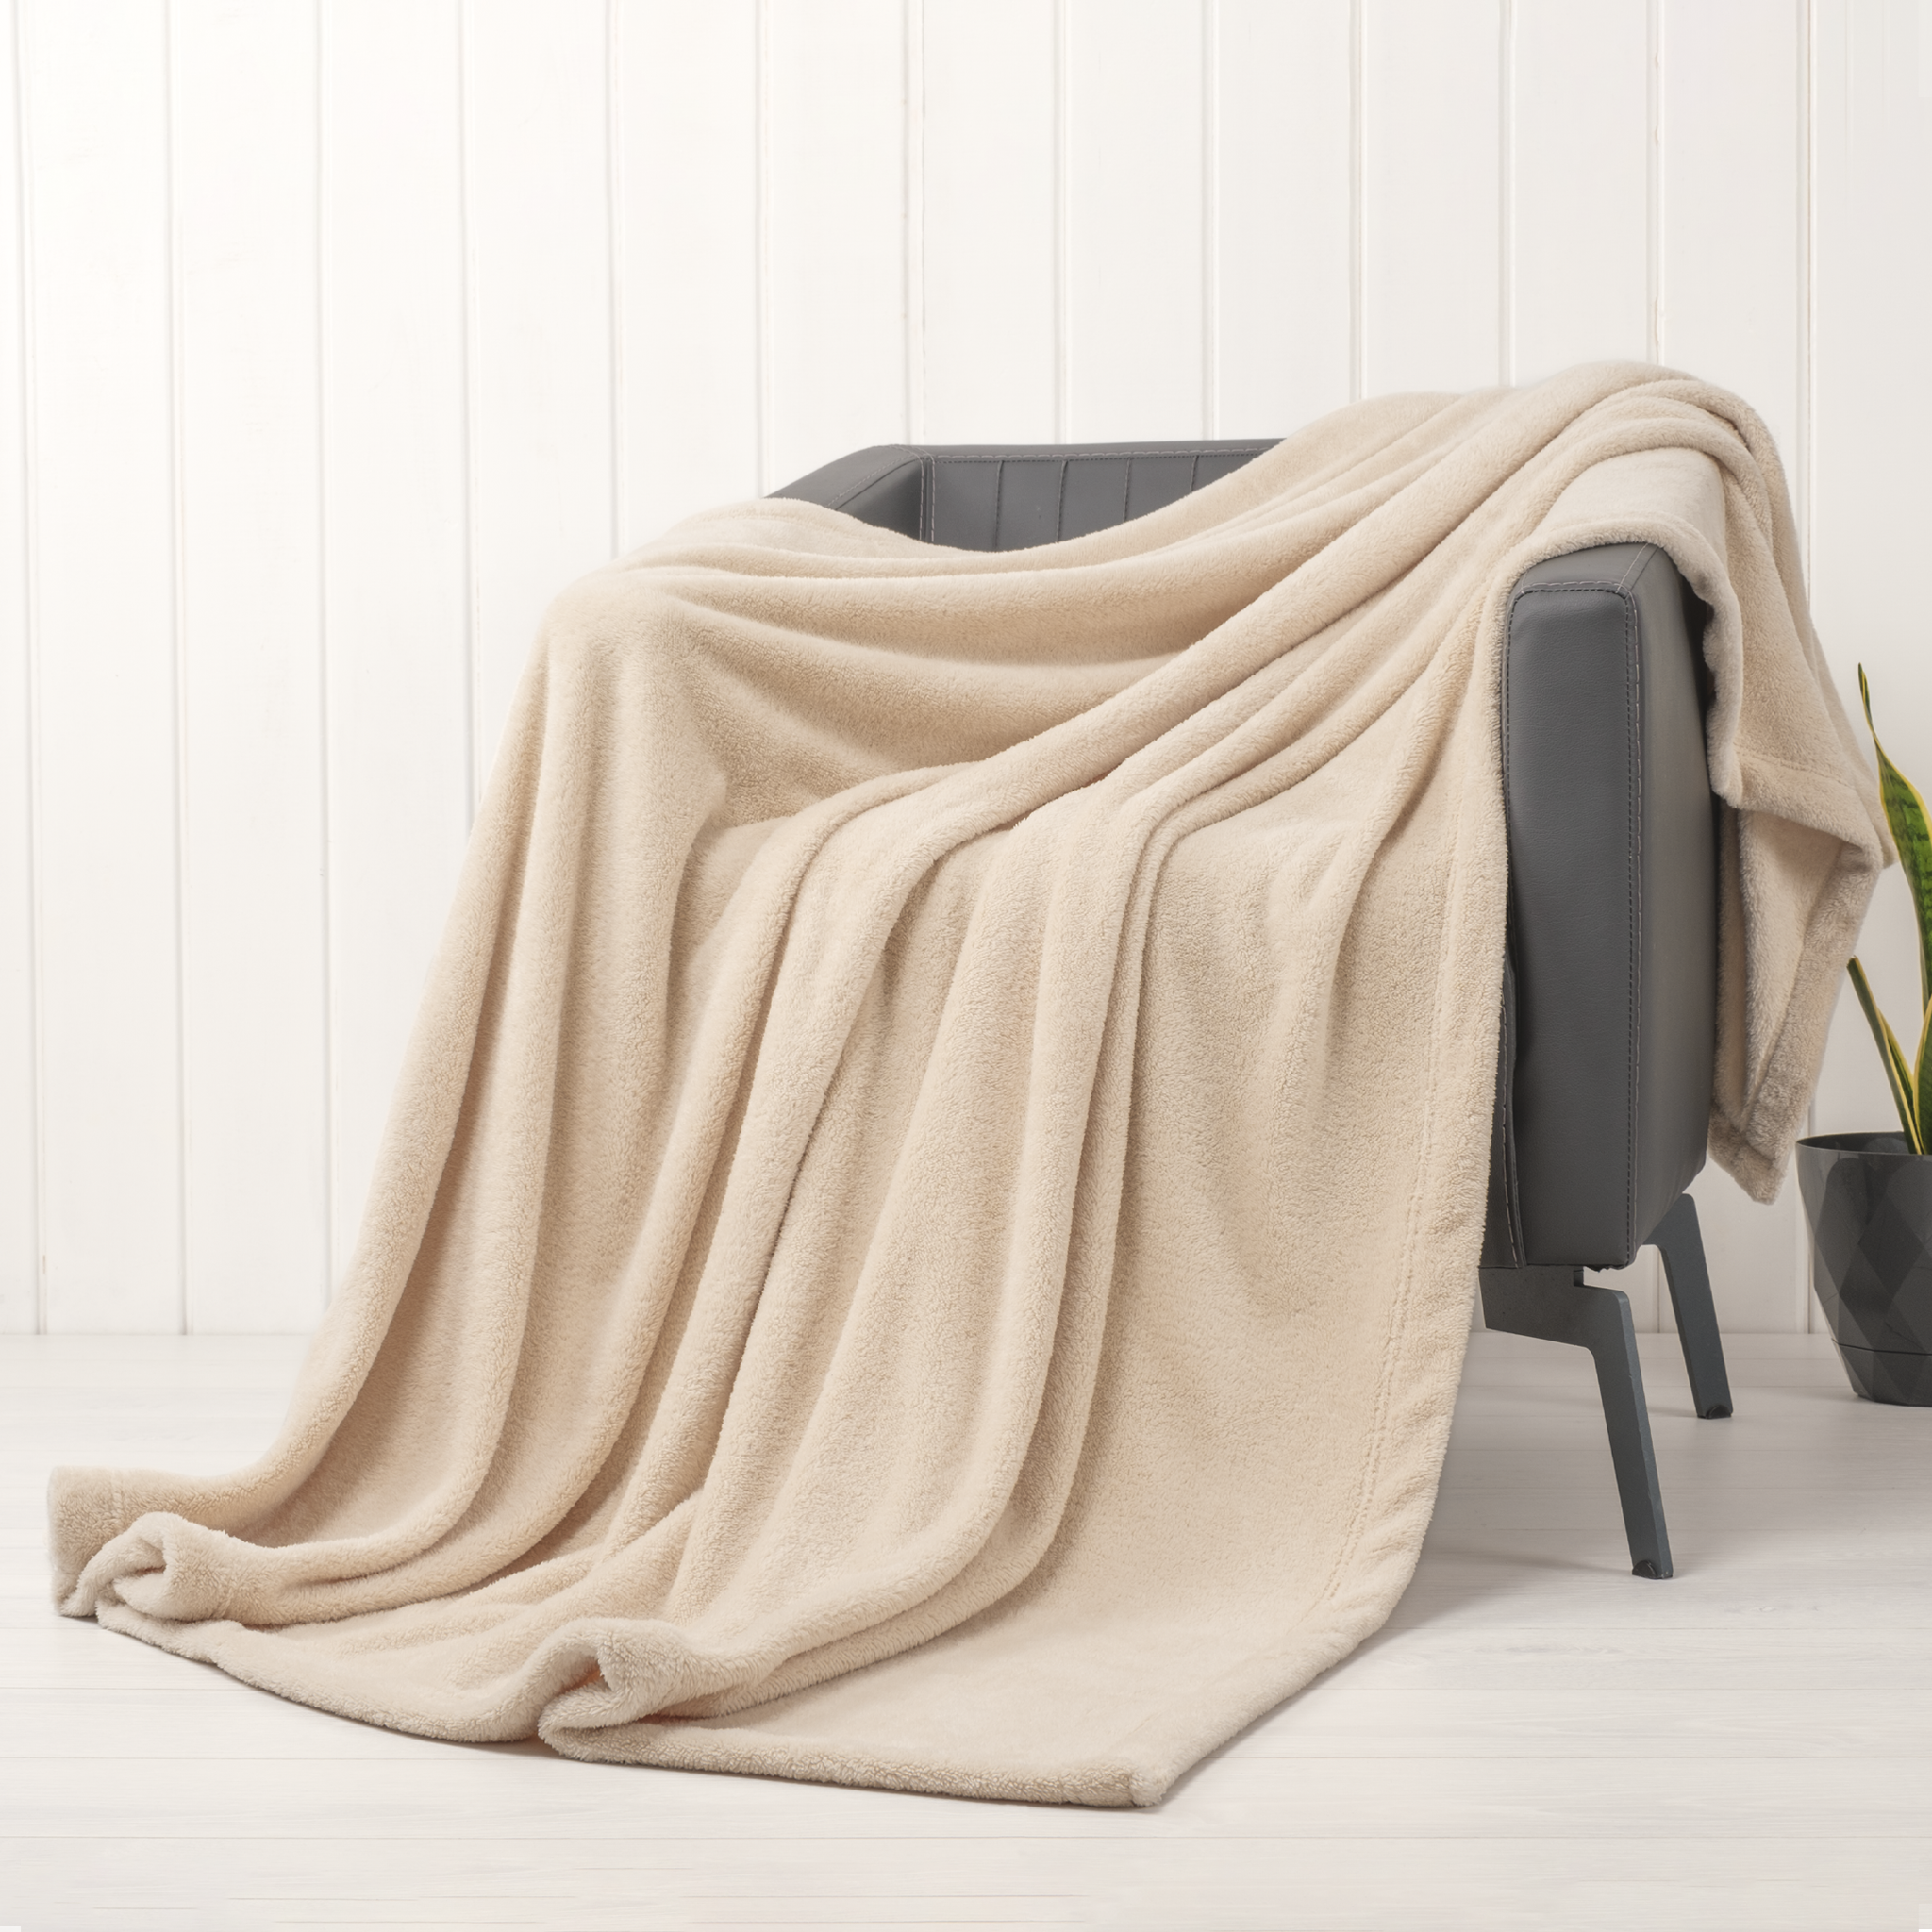 American Soft Linen - Bedding Fleece Blanket - Wholesale - 15 Set Case Pack - Twin Size 60x80 inches - Sand-Taupe - 1